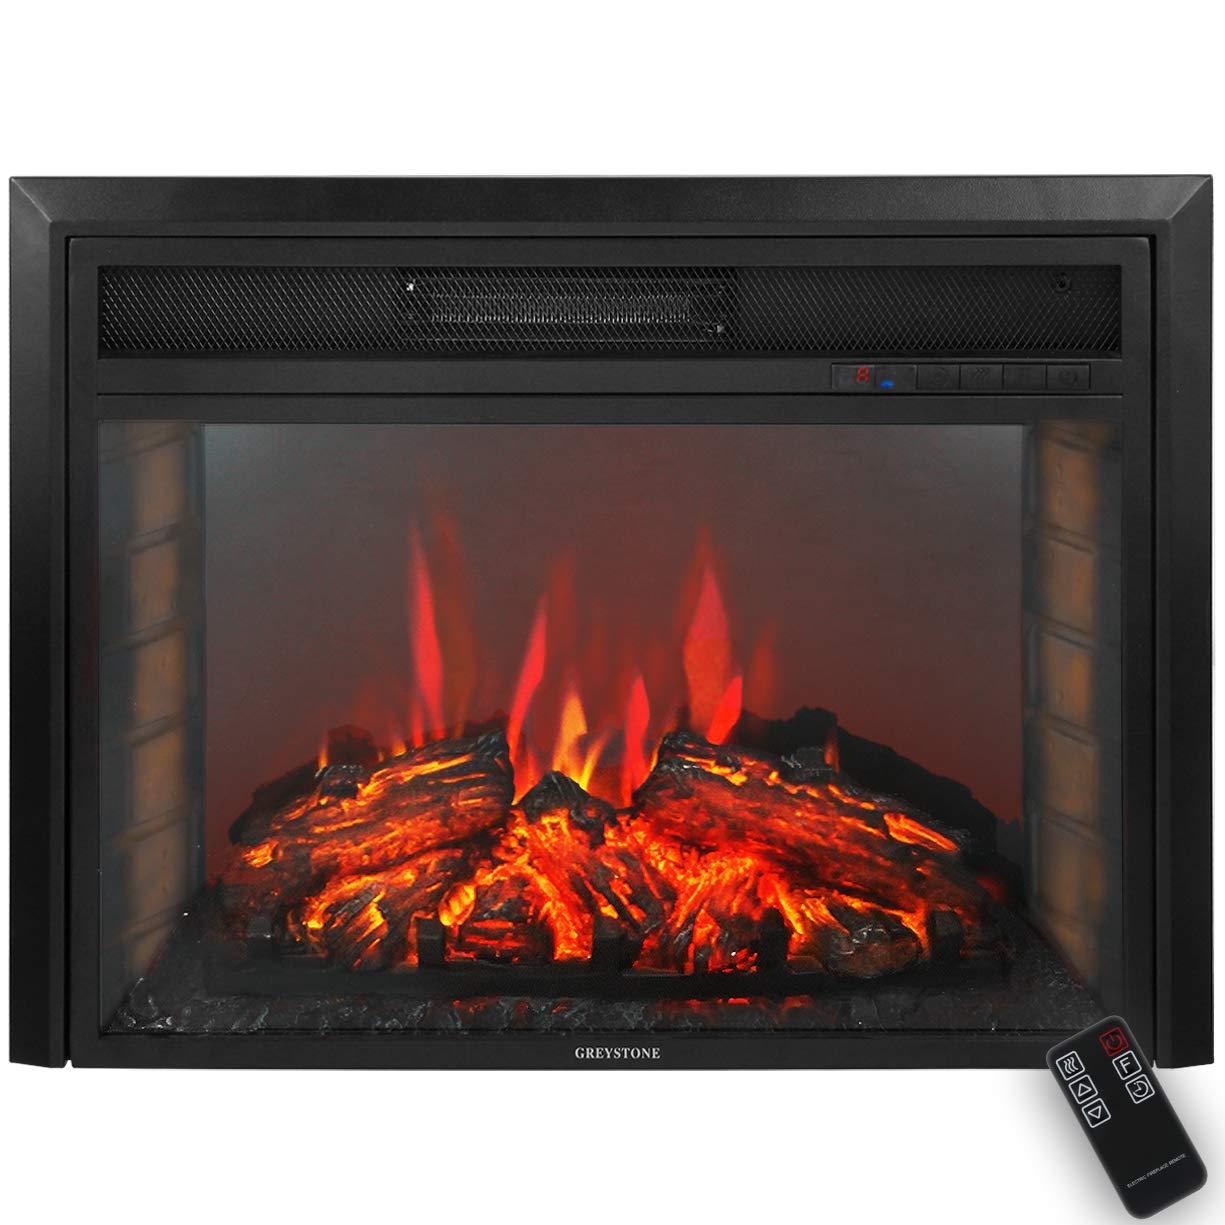 30 Electric Fireplace Insert New 28" 1500w Free Standing Insert Led Log Electric Fireplace